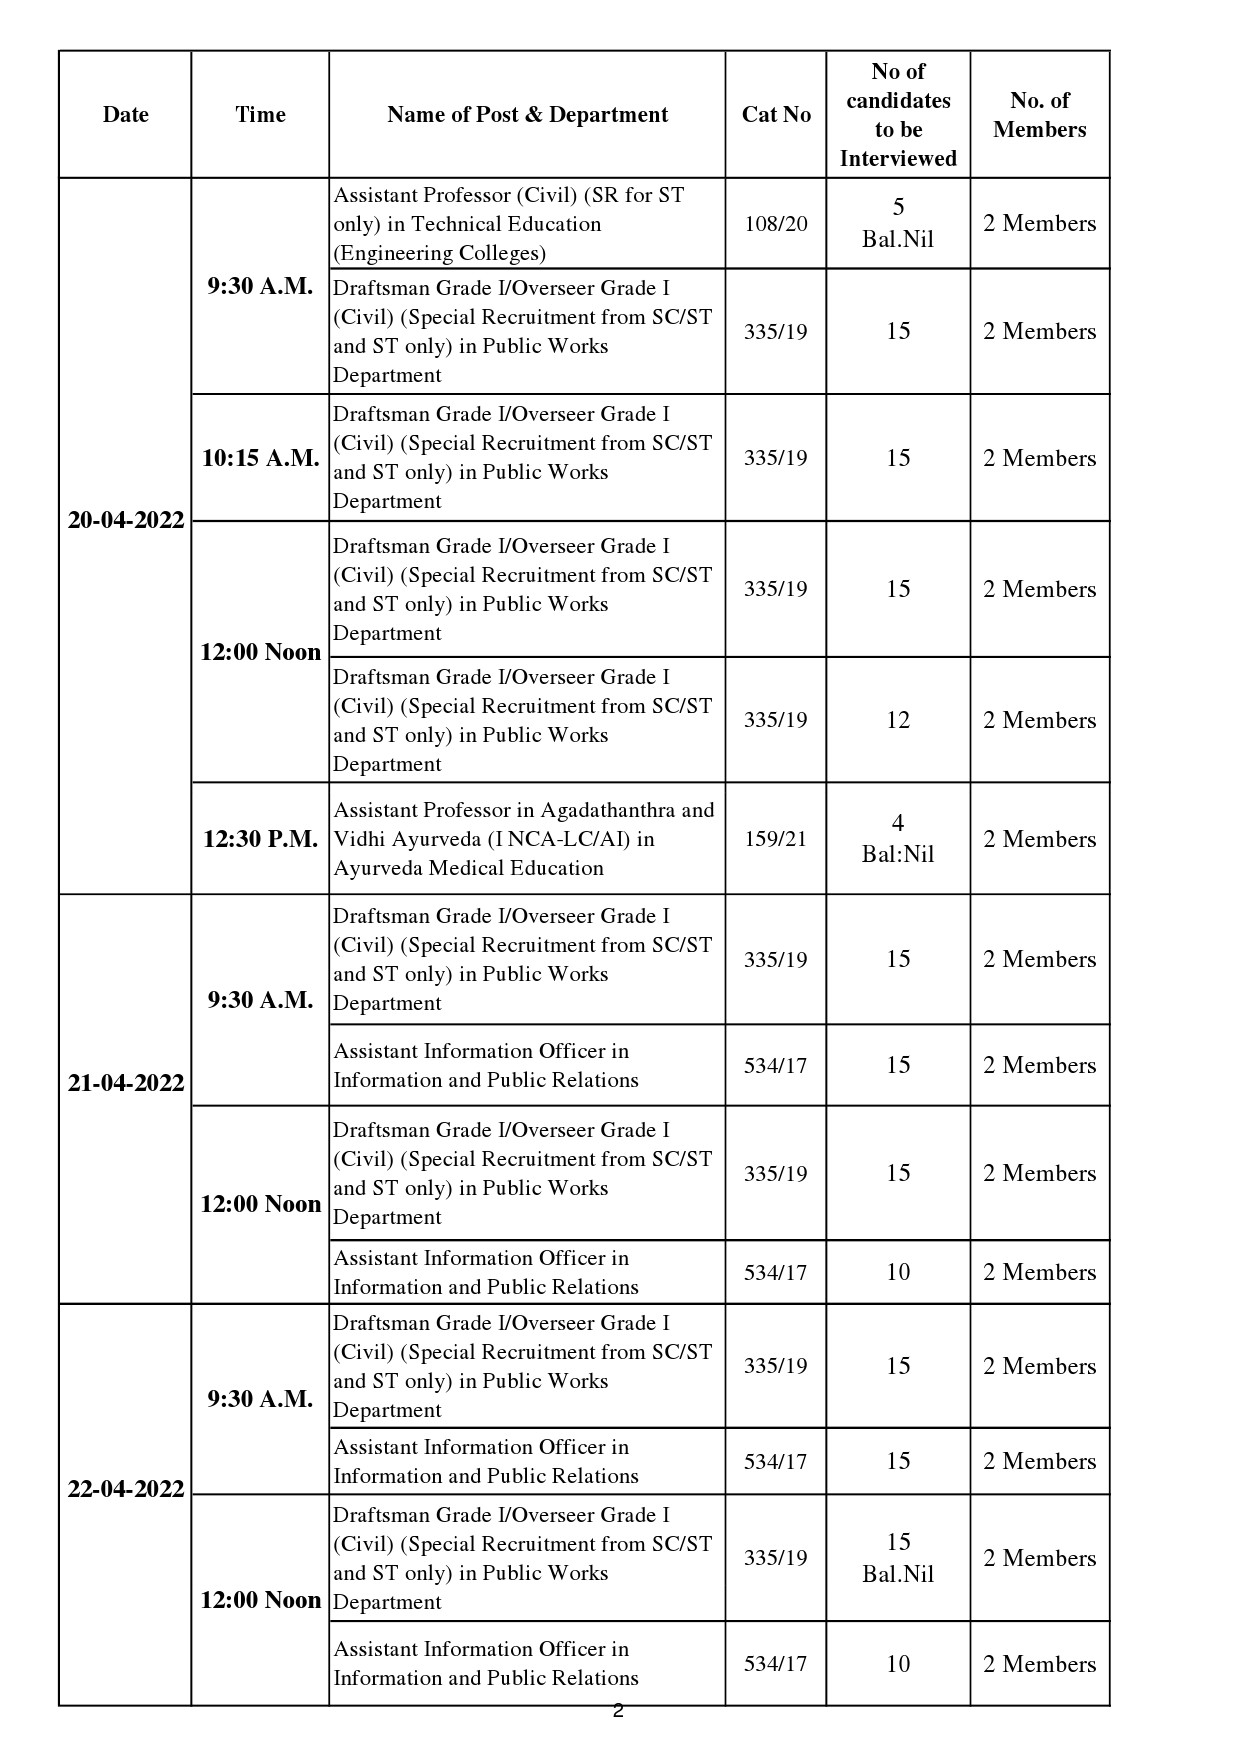 KPSC Interview Programme for the Month of April 2022 - Notification Image 2